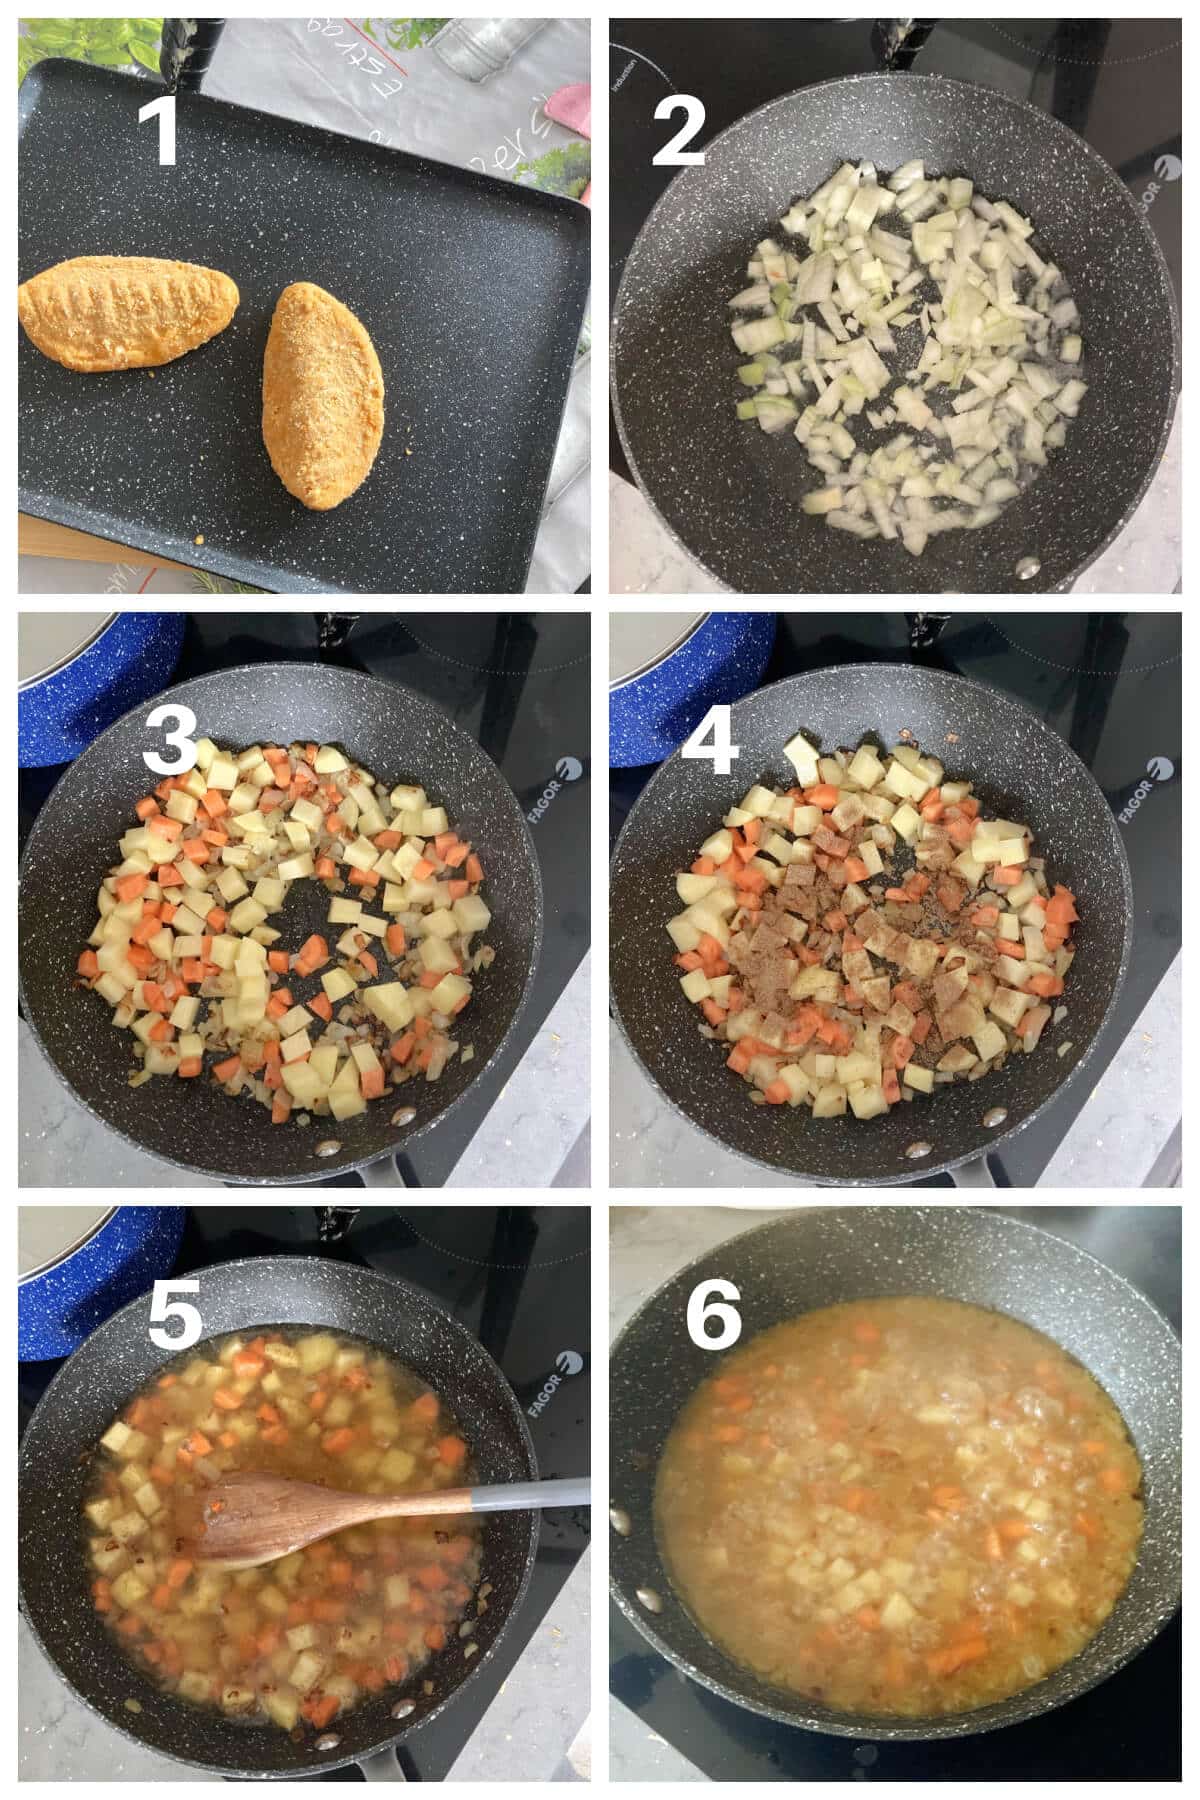 Collage of 6 photos to show how to make Quorn katsu curry.